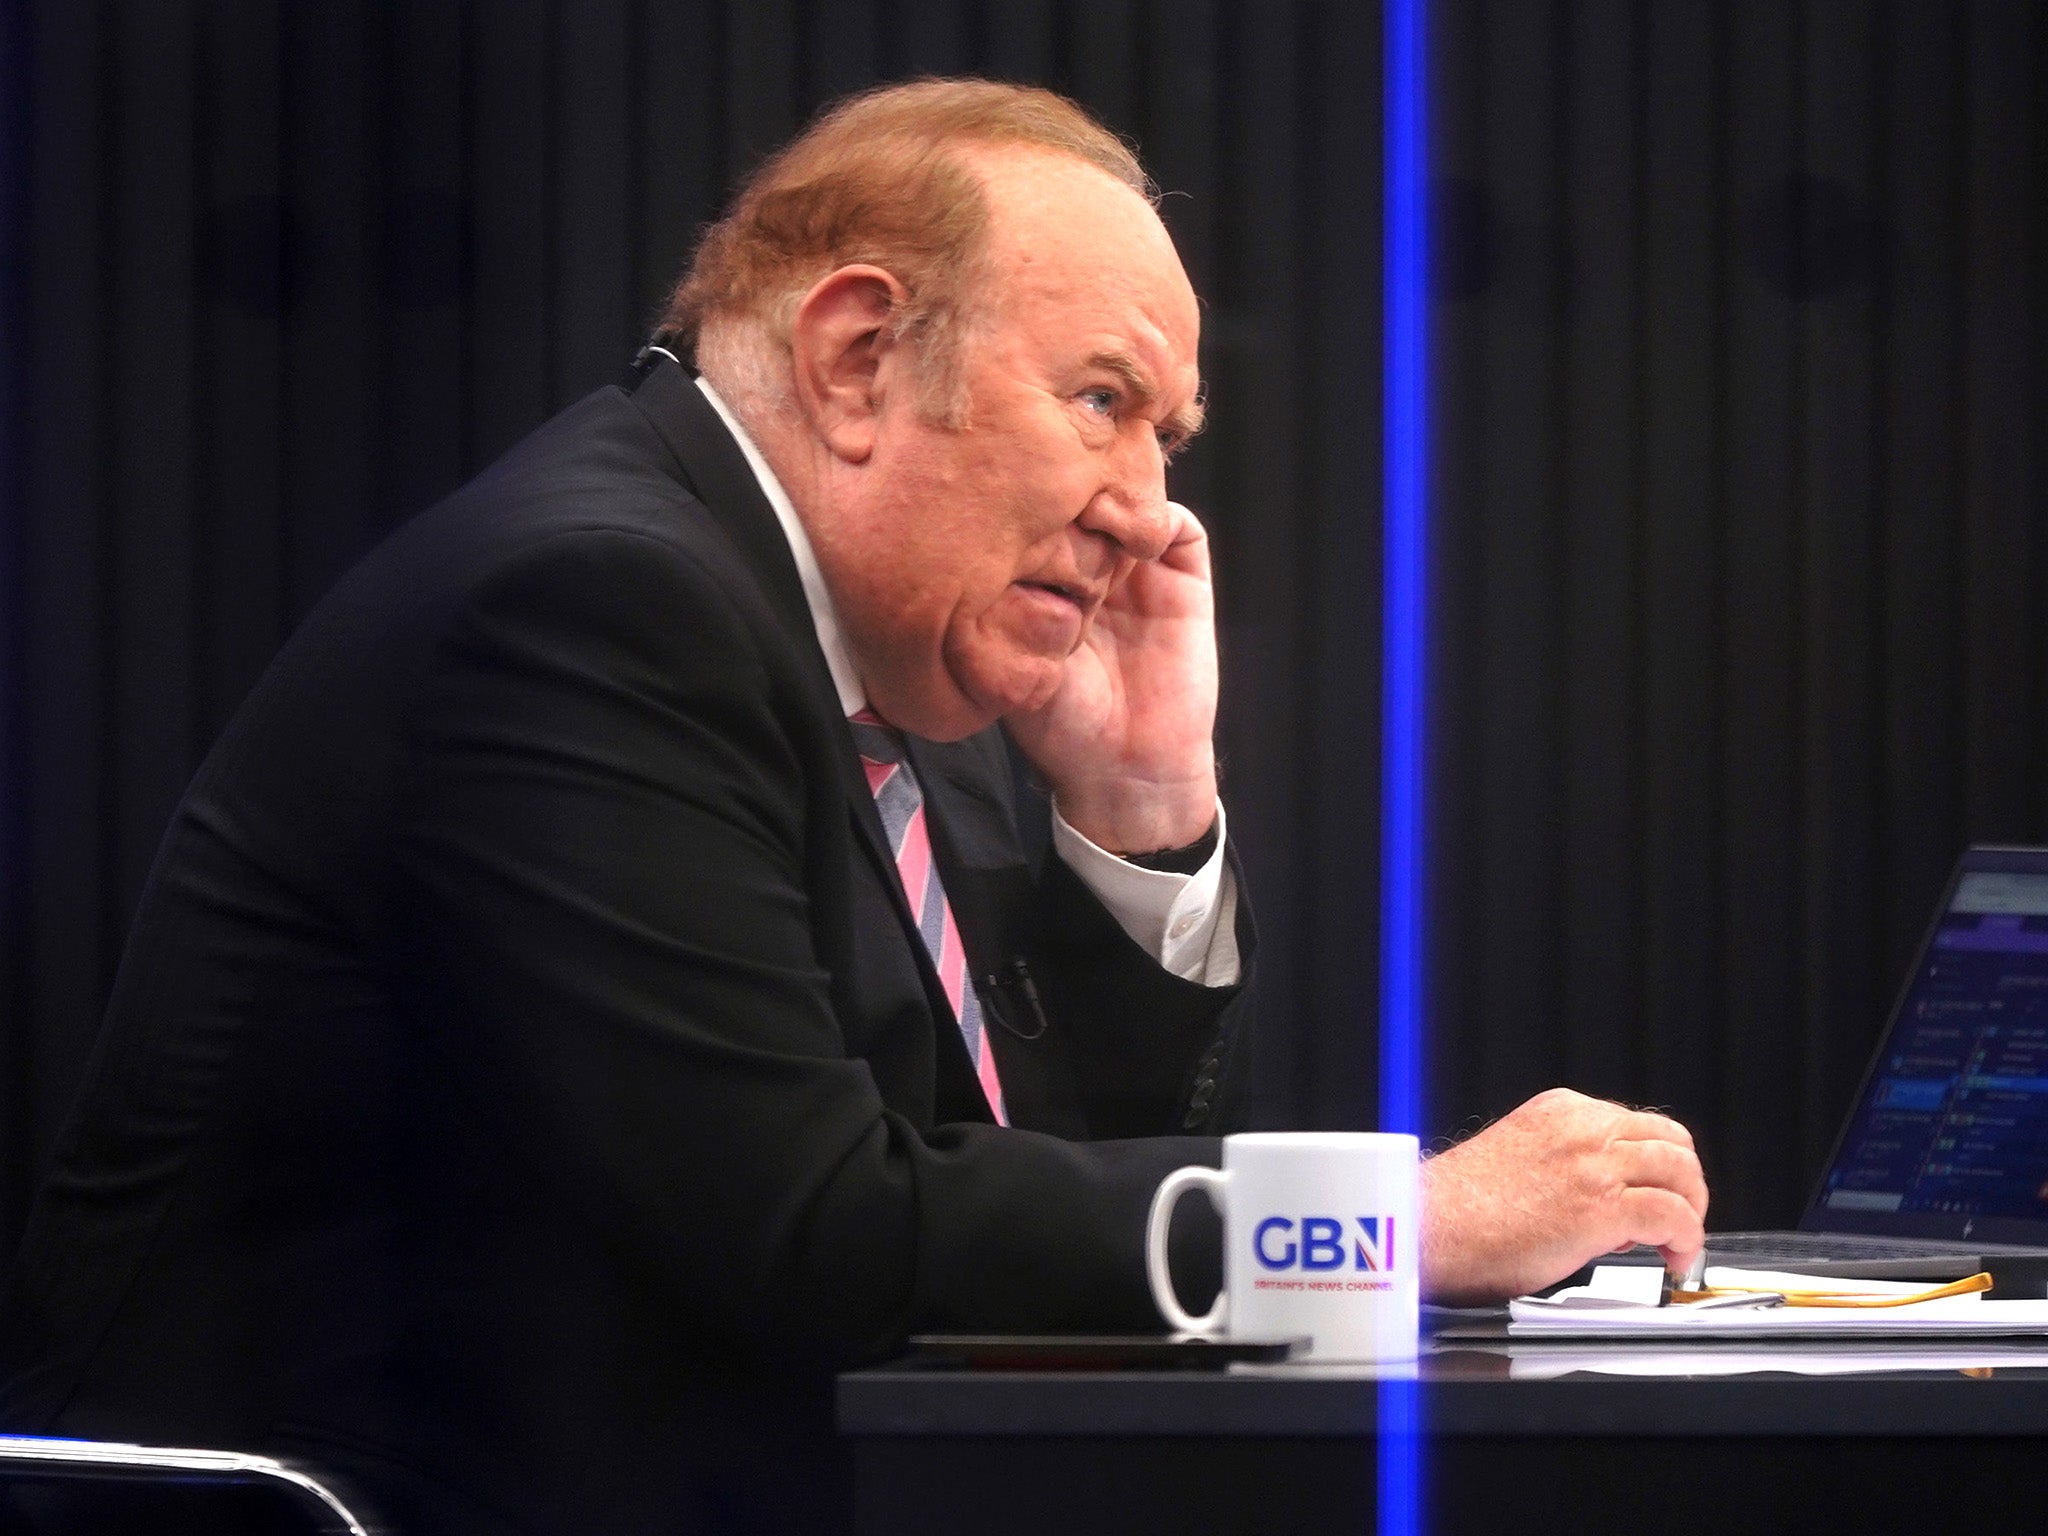 Andrew Neil prepares to broadcast from a studio during the launch event for GB News